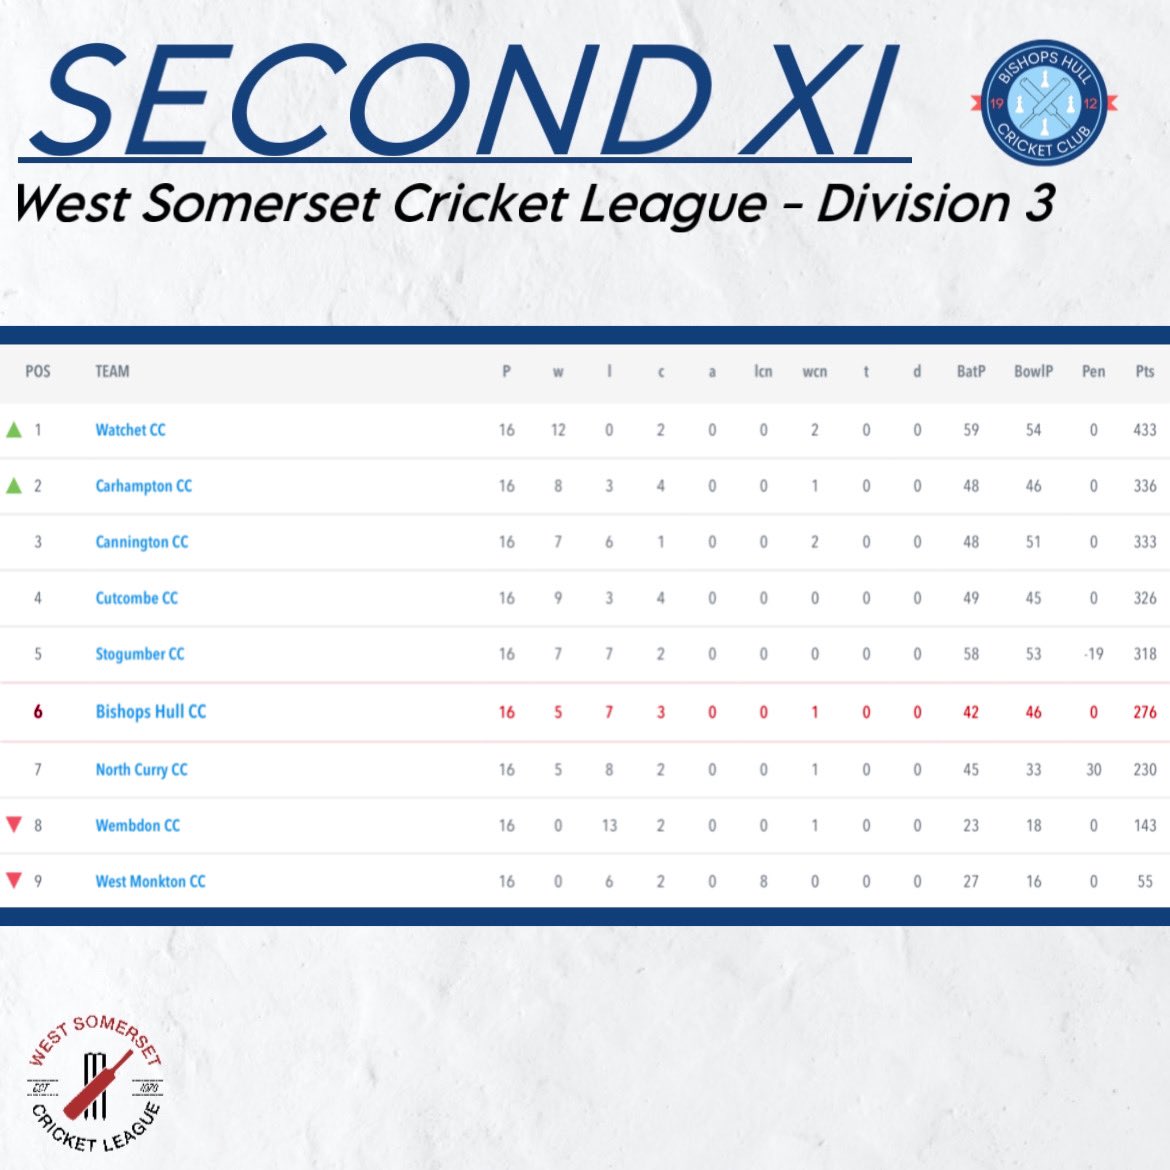 𝙻𝚎𝚊𝚐𝚞𝚎 𝚝𝚊𝚋𝚕𝚎𝚜…📊 With the season drawing to a close, here’s how your BHCC teams finished up. #BHCC | #UpTheHull | 🔴🔵